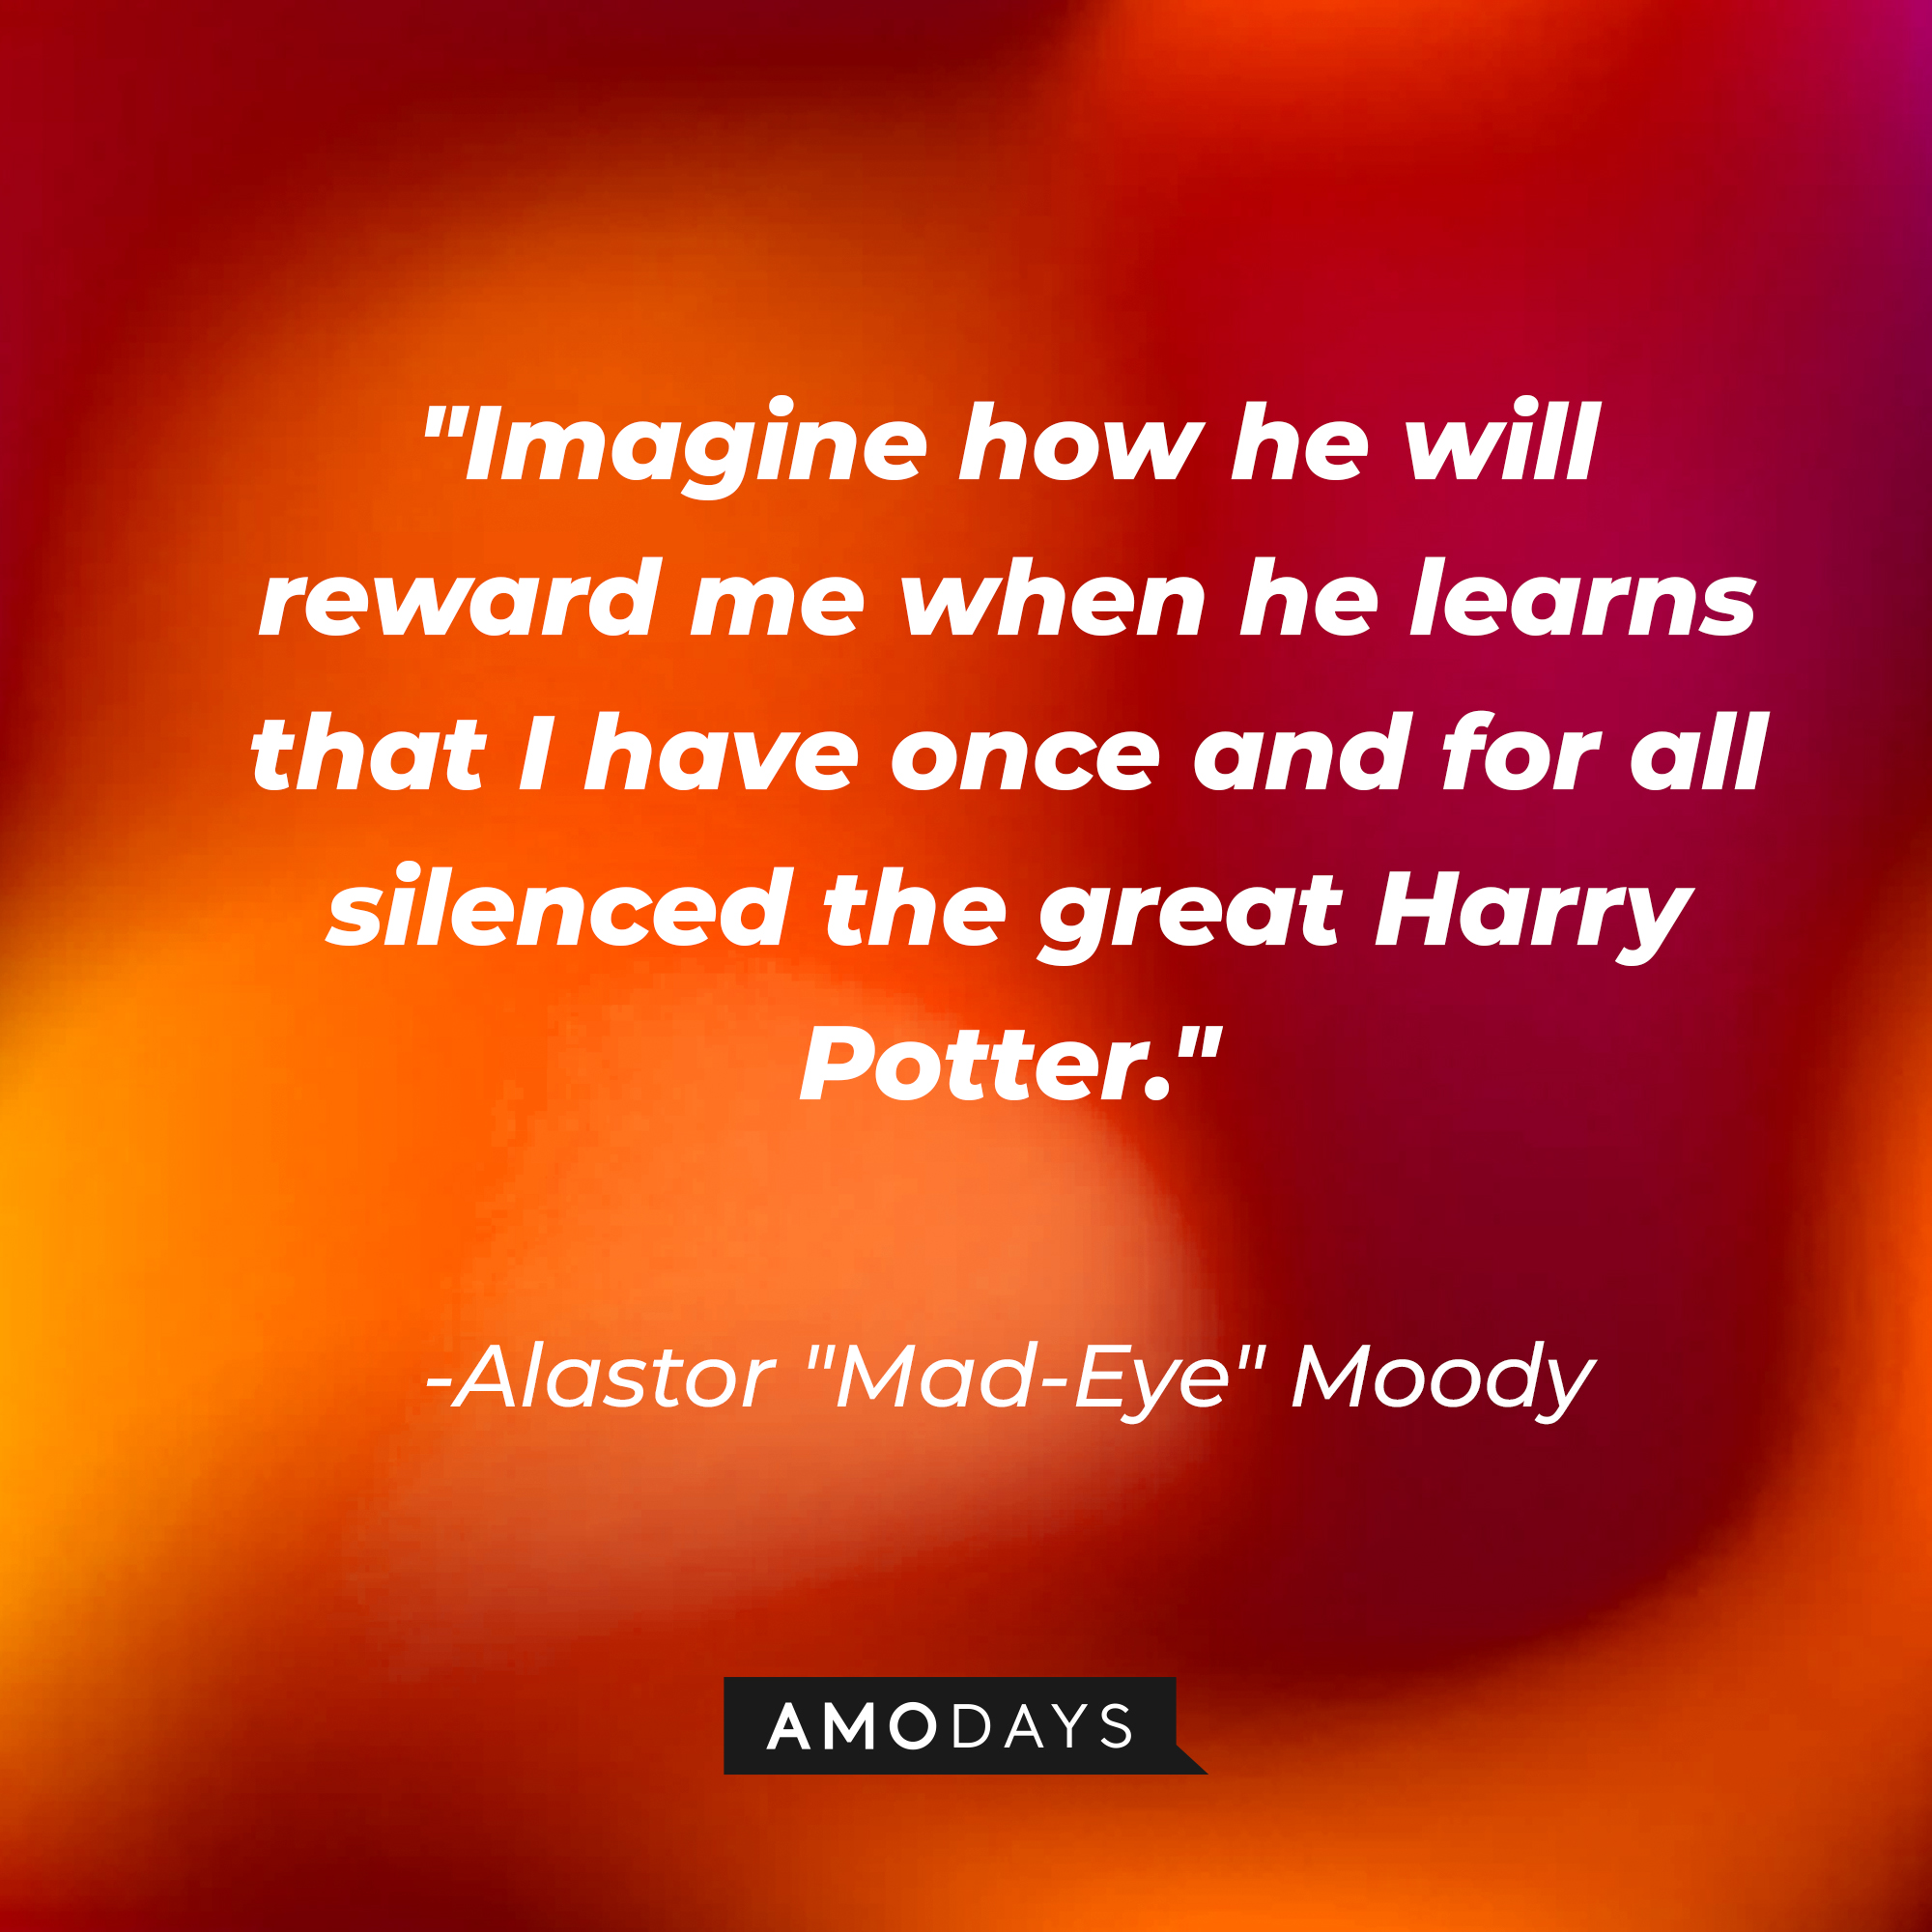 Alastor "Mad-Eye" Moody's quote: "Imagine how he will reward me when he learns that I have once and for all silenced the great Harry Potter."  | Image: Amodays